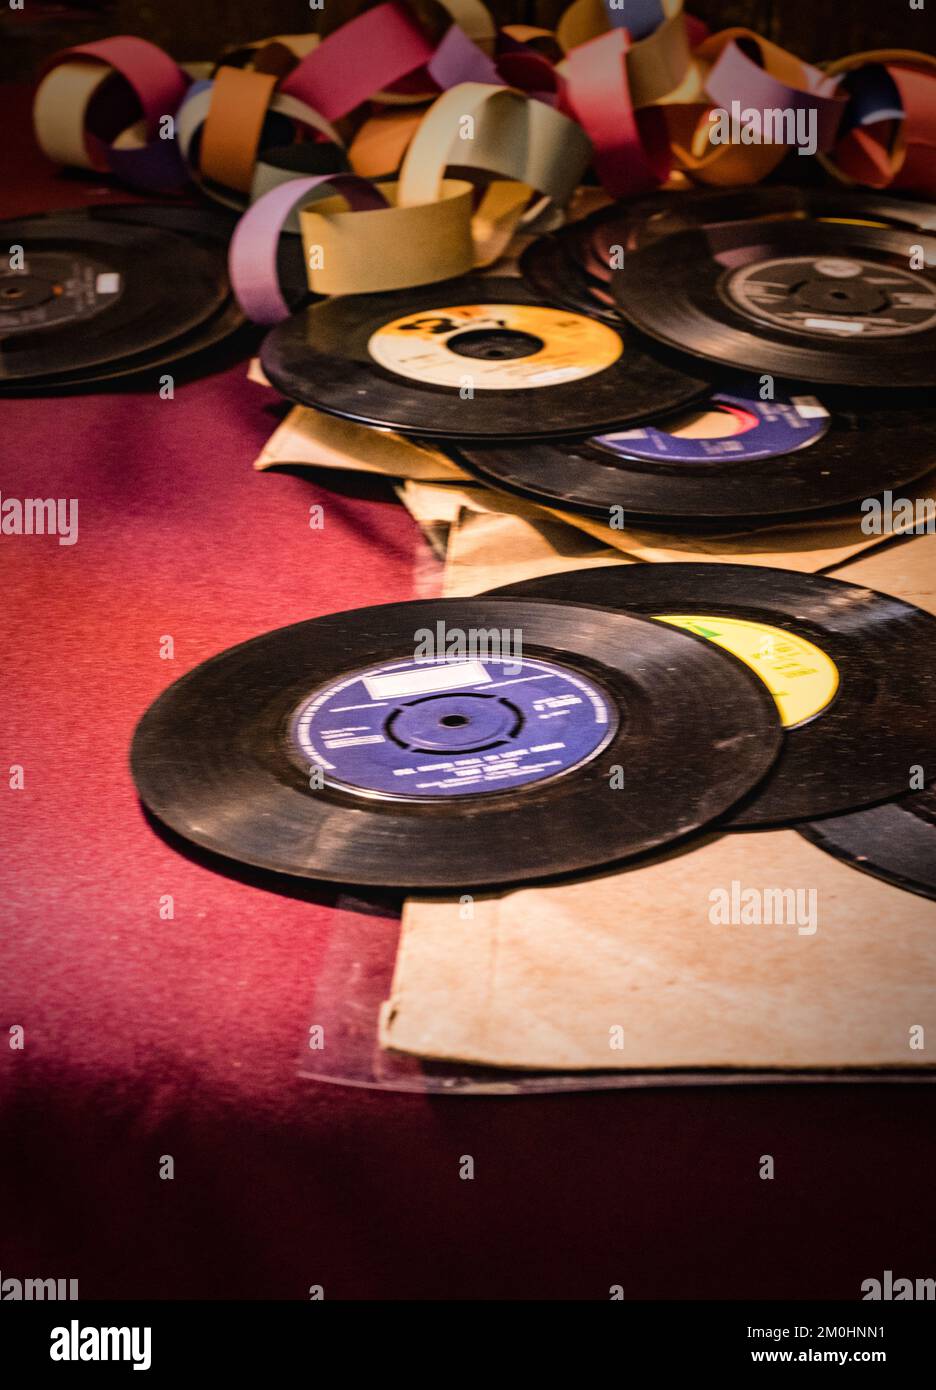 A pile of old fashioned 45 single vinyl records and coloured paper chain. Stock Photo